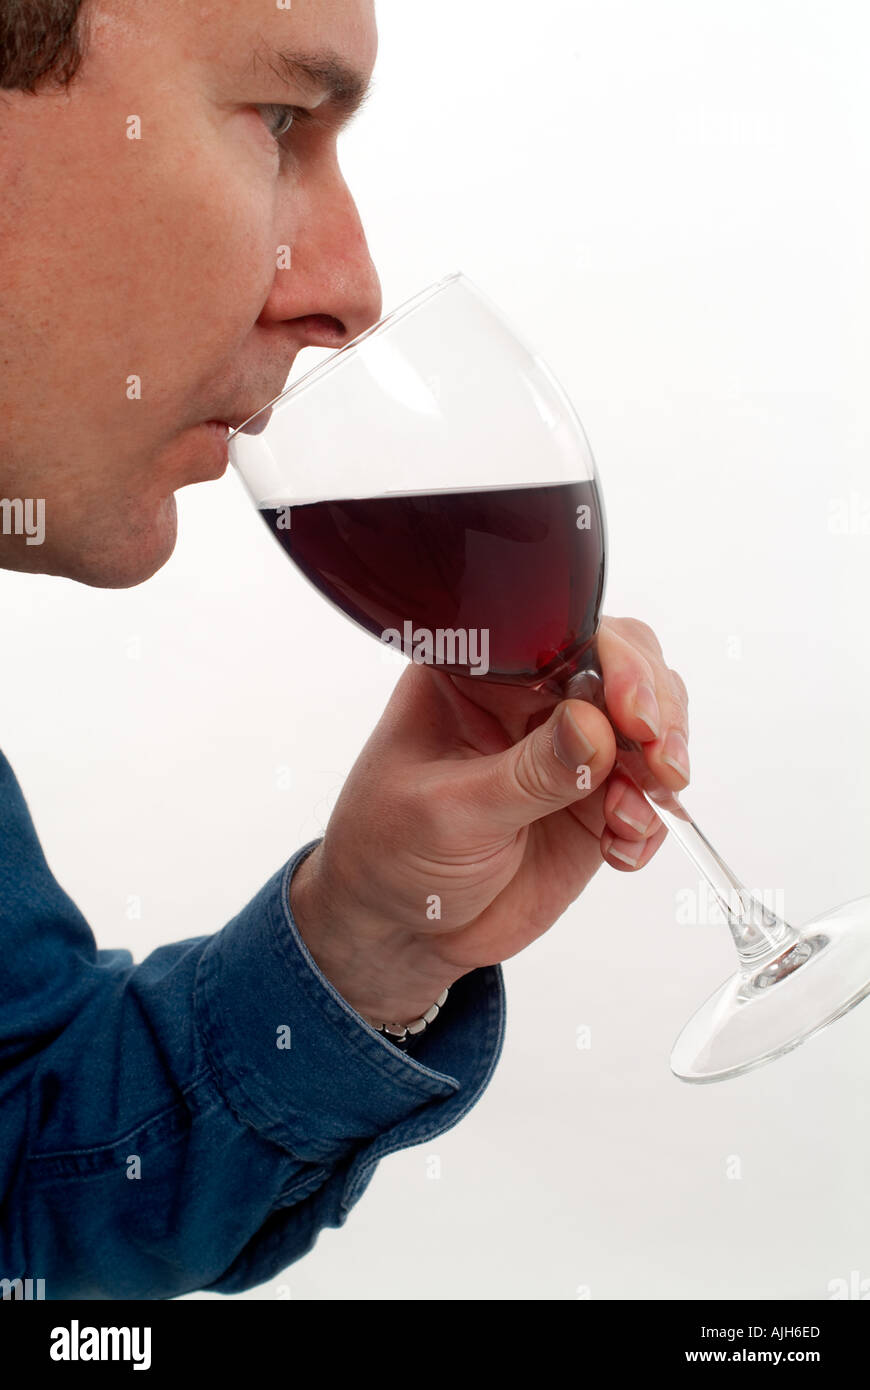 man tasting a glass of wine Stock Photo